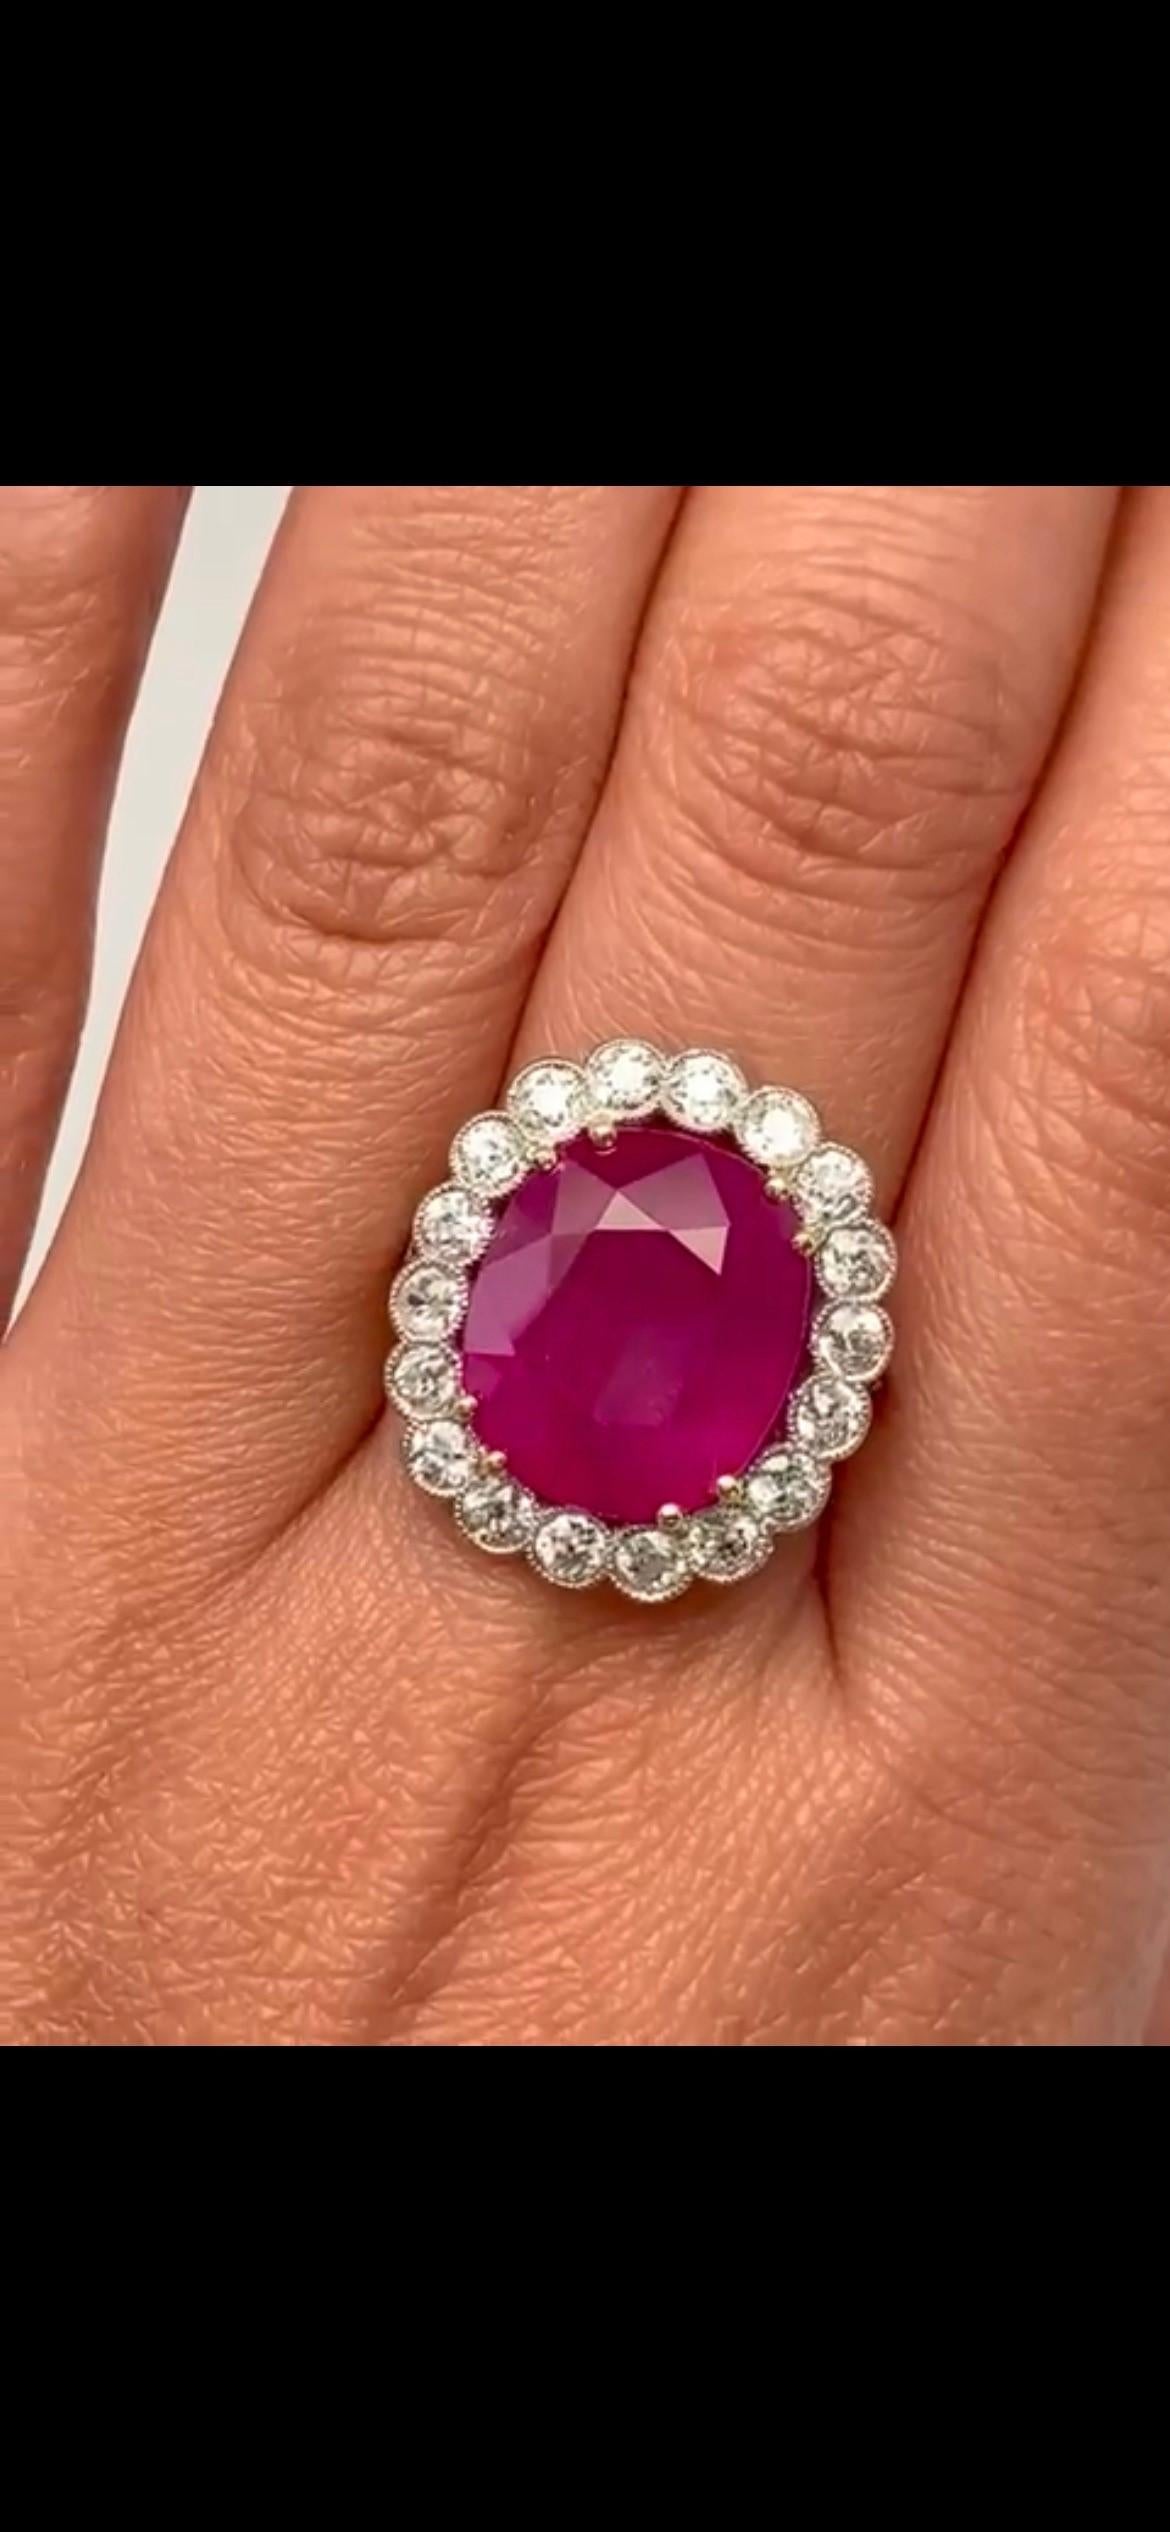 18 karat yellow gold, ring showcases a stunning 11.40 carat Burma ruby at its center, certified by GRS.  surrounded by this magnificent ruby are 1.00 carats of dazzling white diamonds, enhancing its beauty and brilliance.